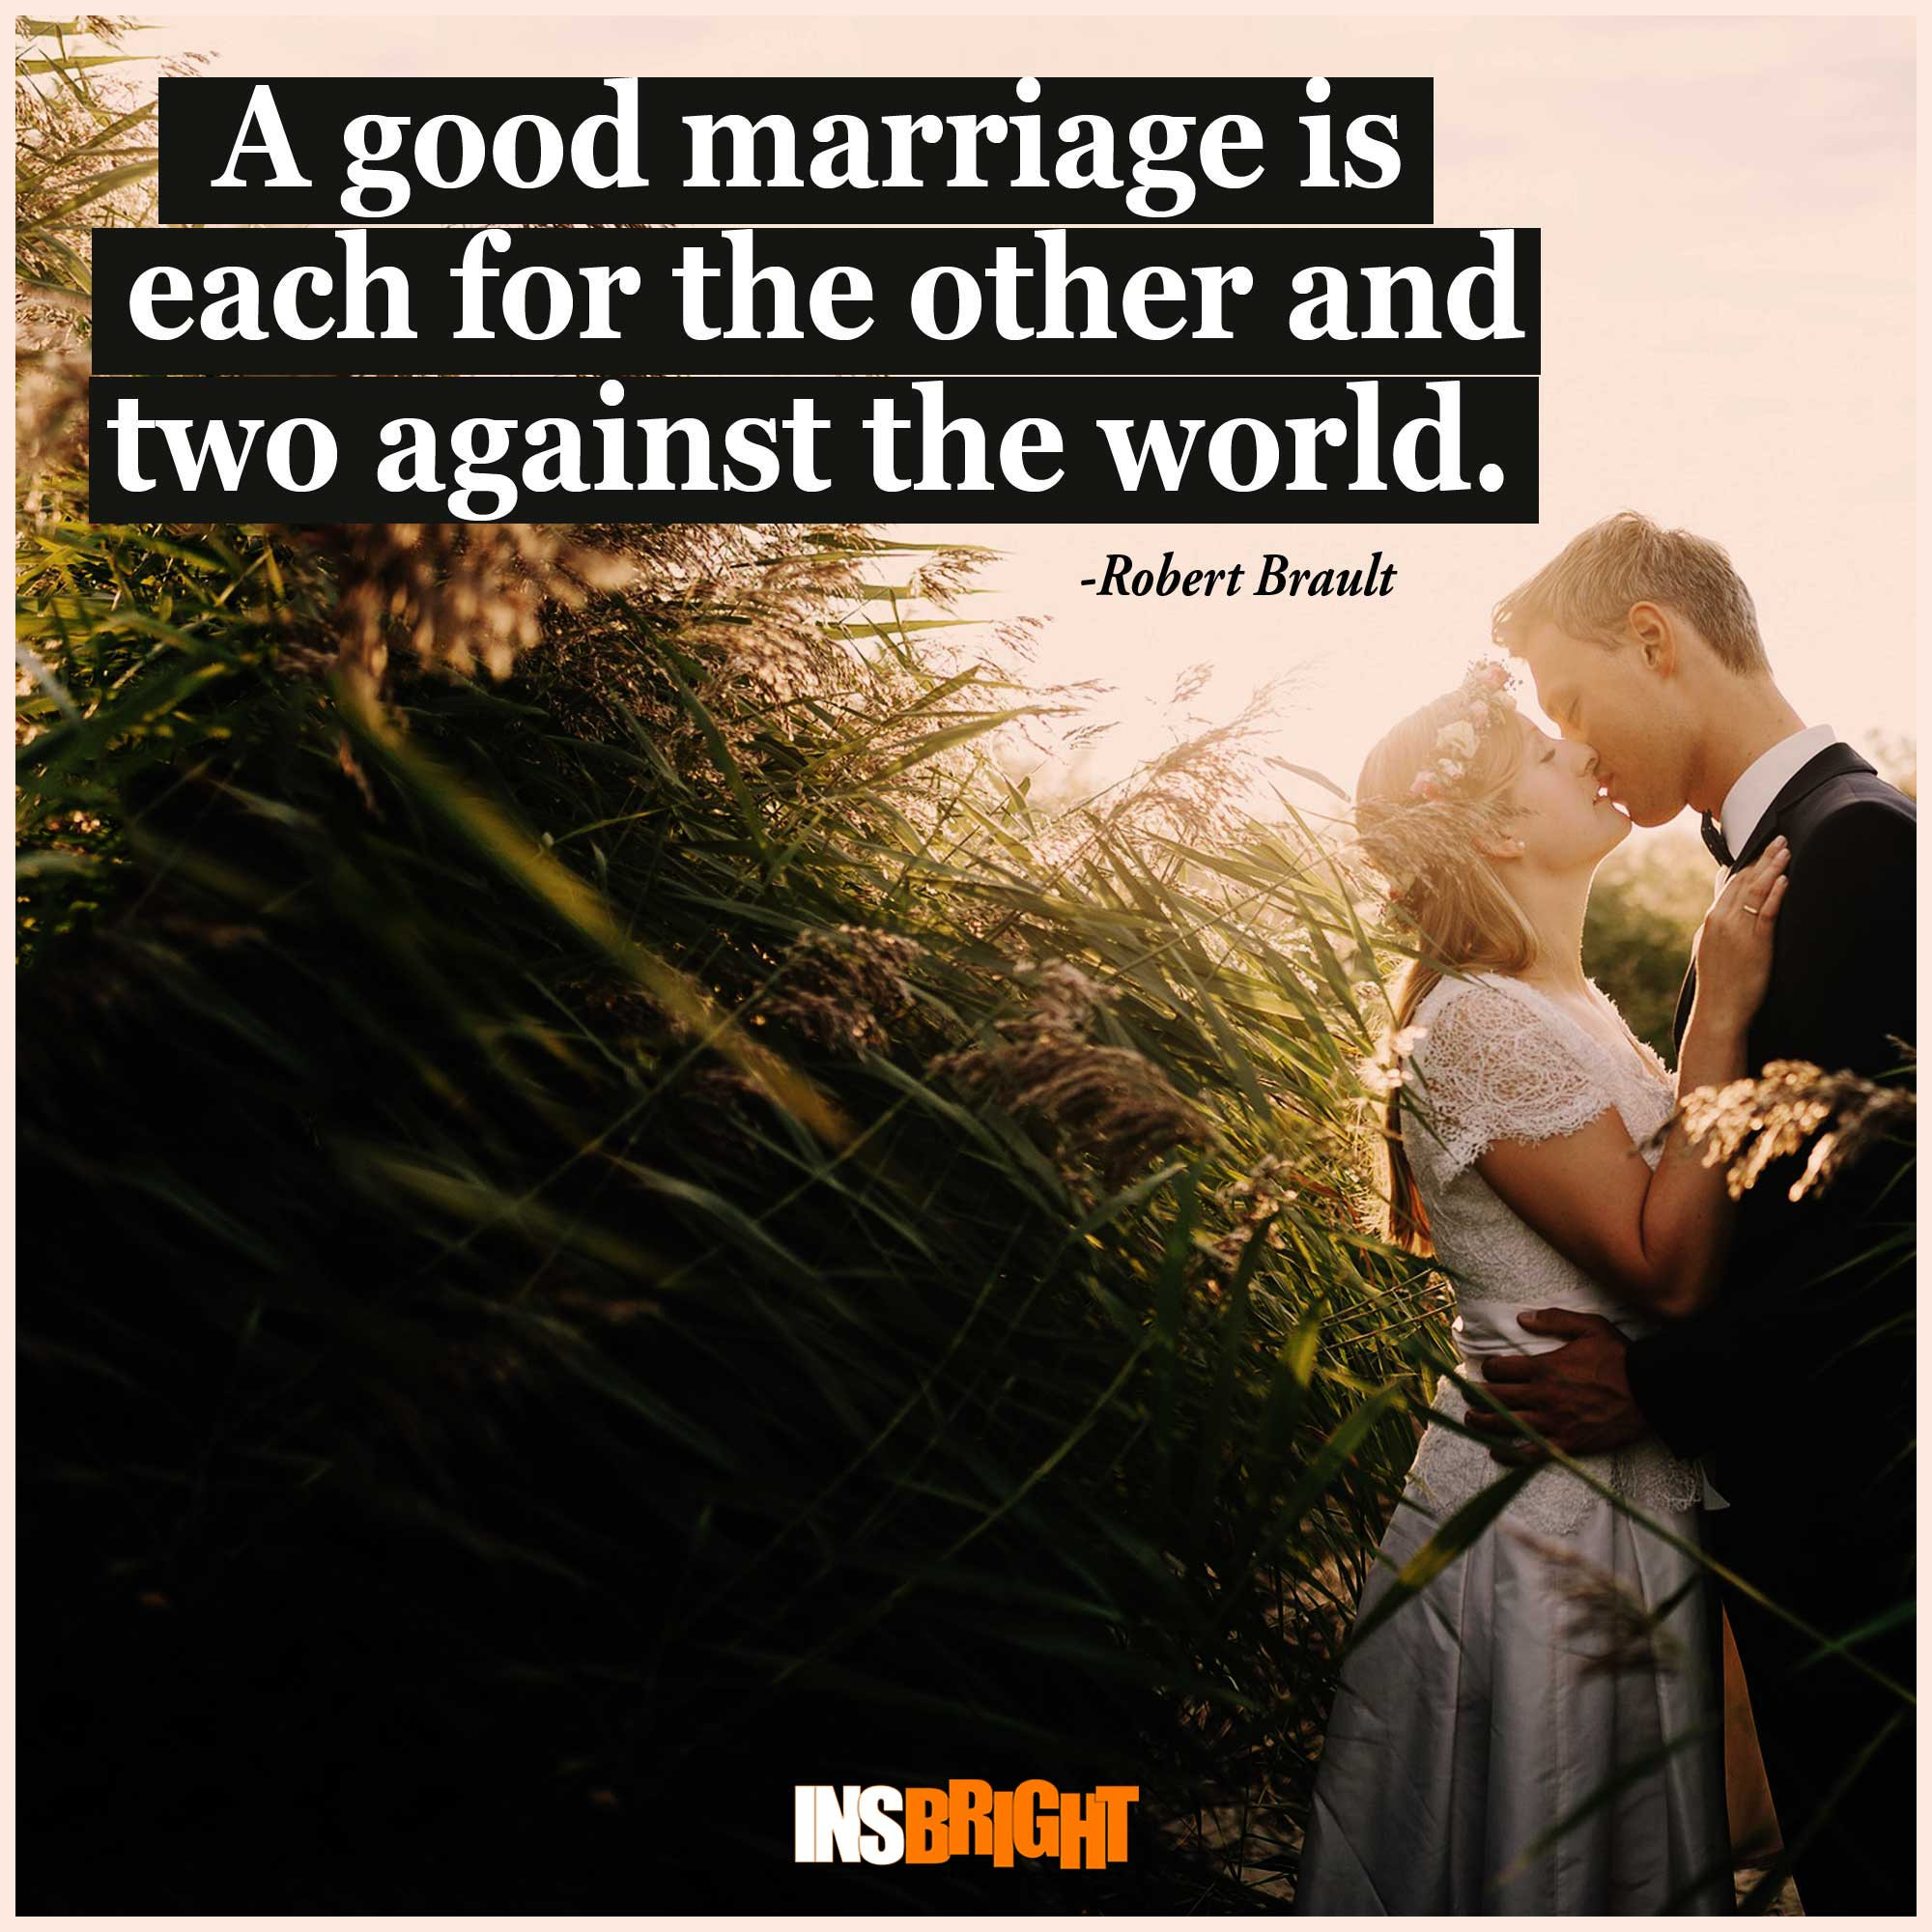 Quote Marriage
 Inspirational Marriage Quotes By Famous People With